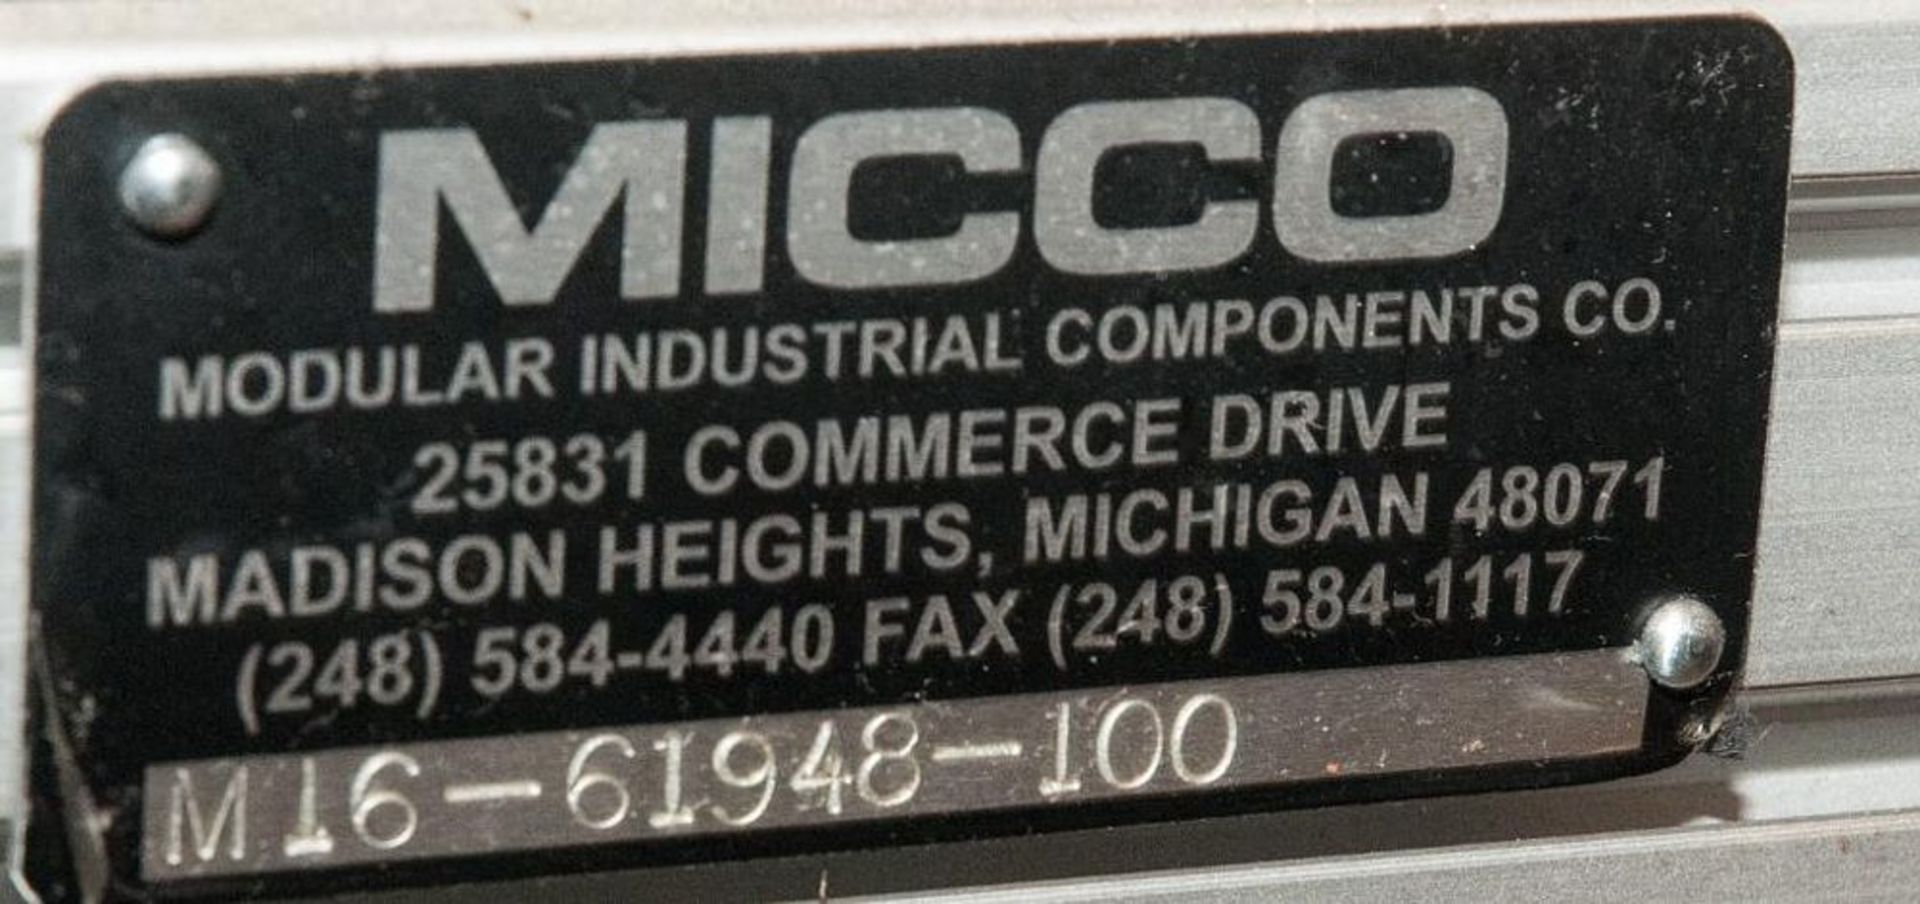 Torsion Bar Rater MICCO M16-61948-100 w/Allen Bradley Panelview Plus 1000, Overall Bed Length approx - Image 4 of 10